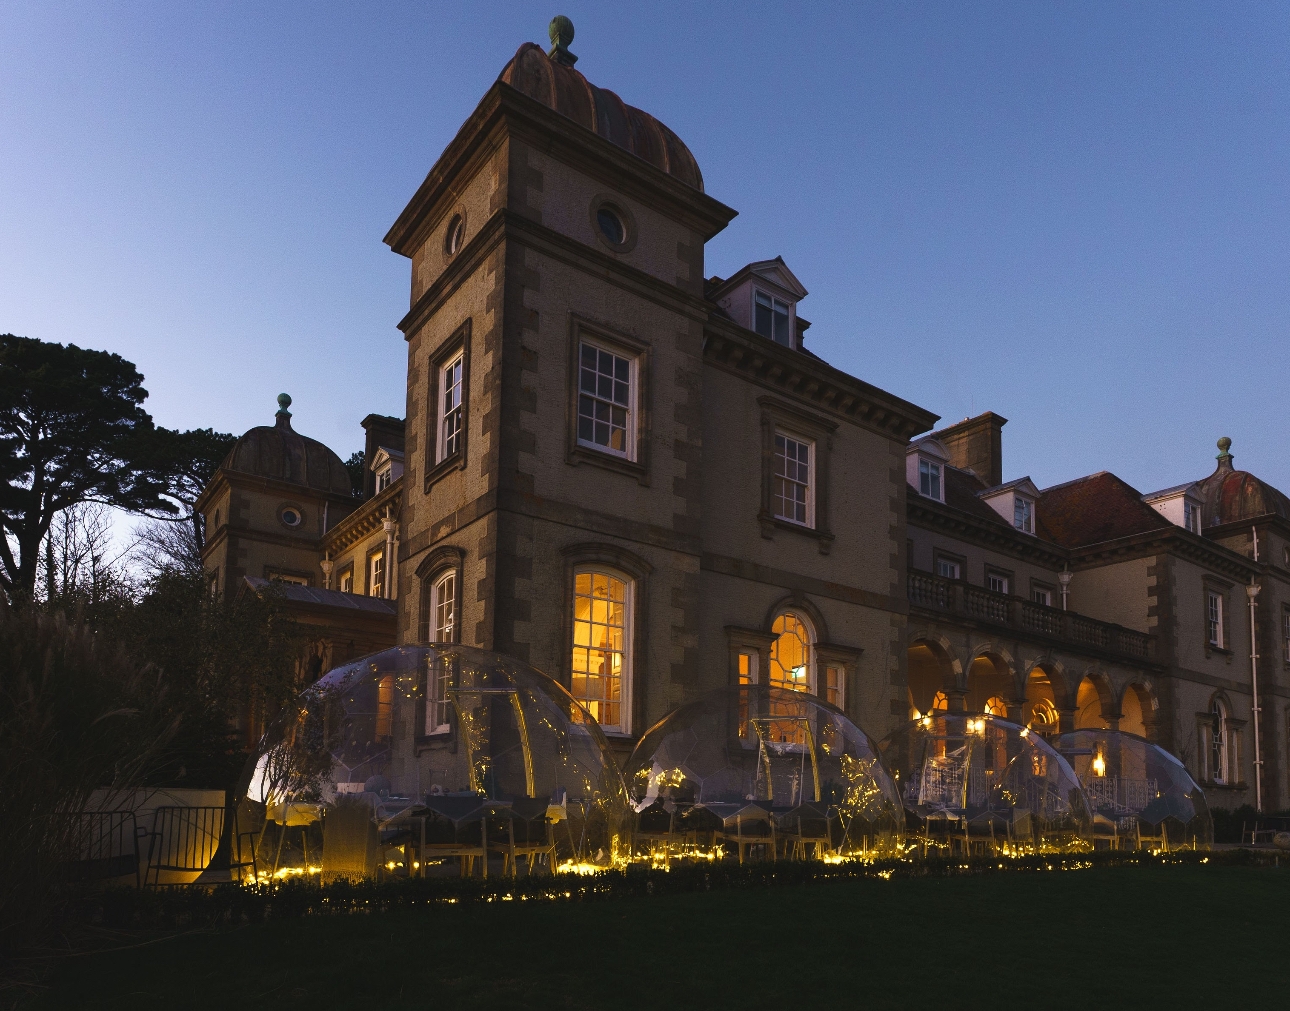 Dome dining experience at Fowey Hall in Cornwall